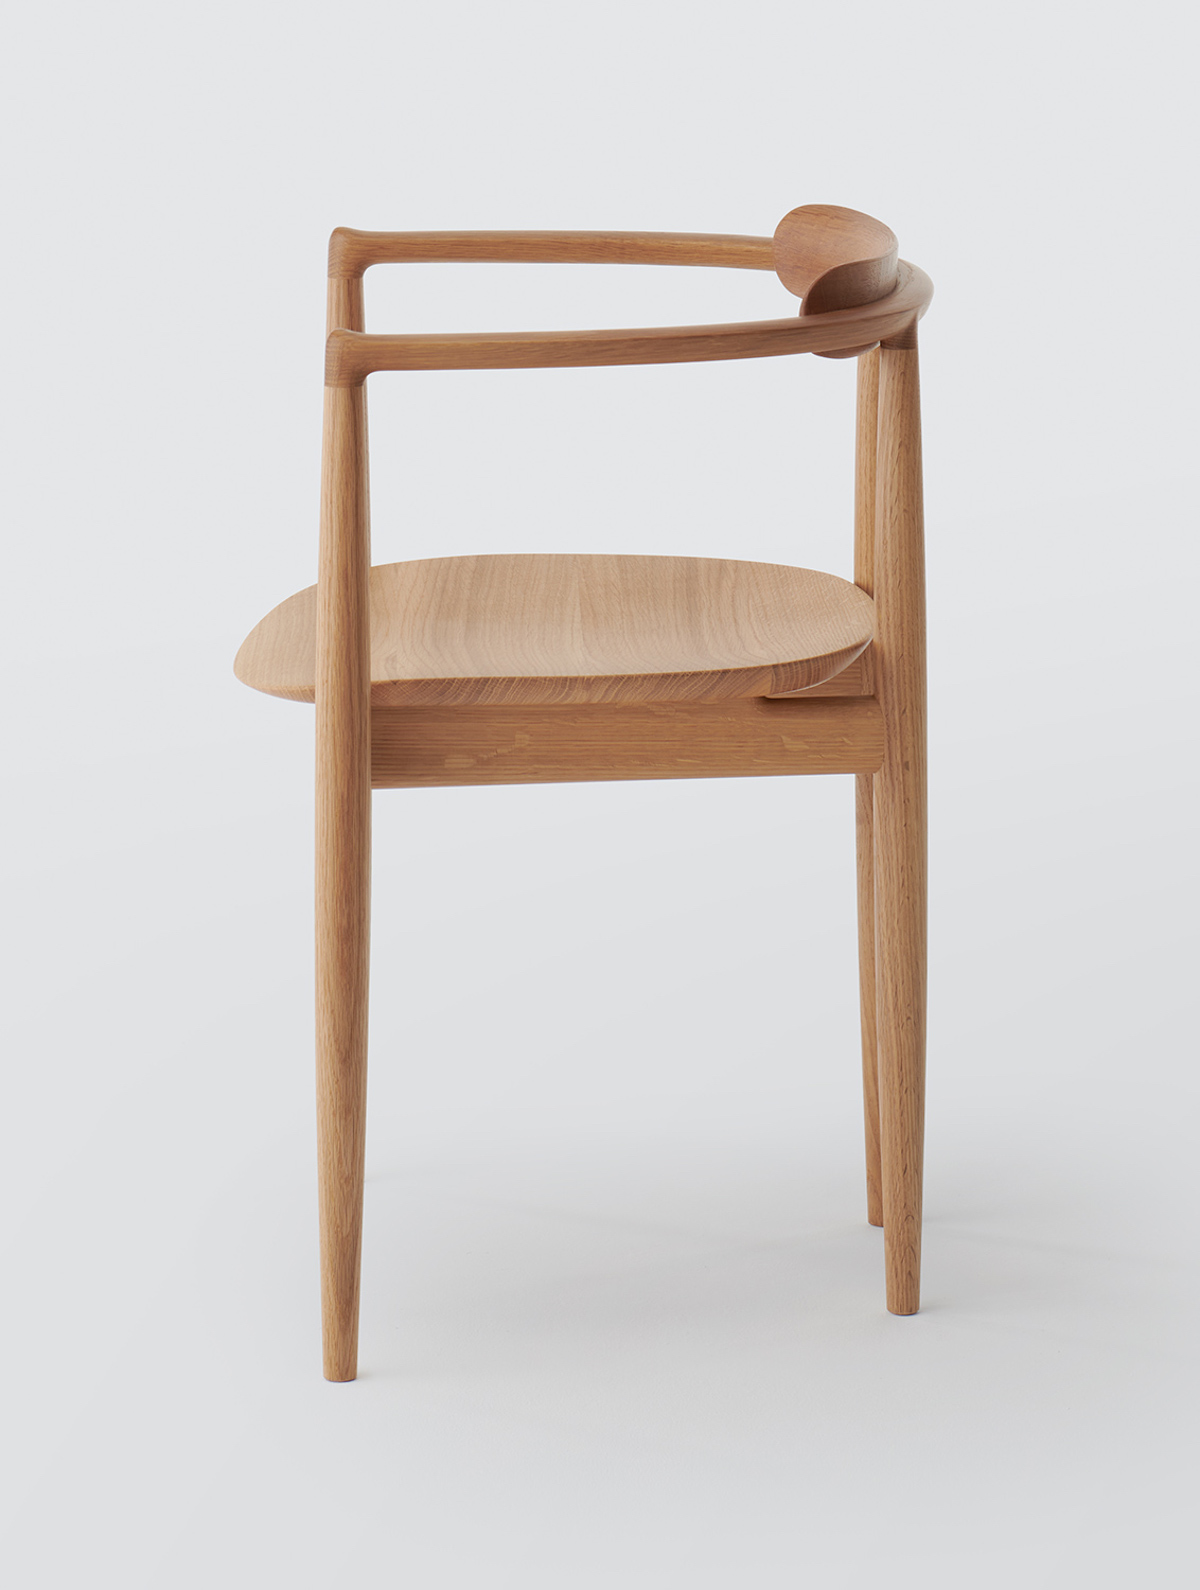 The Miau Chair, wooden, designed by GamFratesi